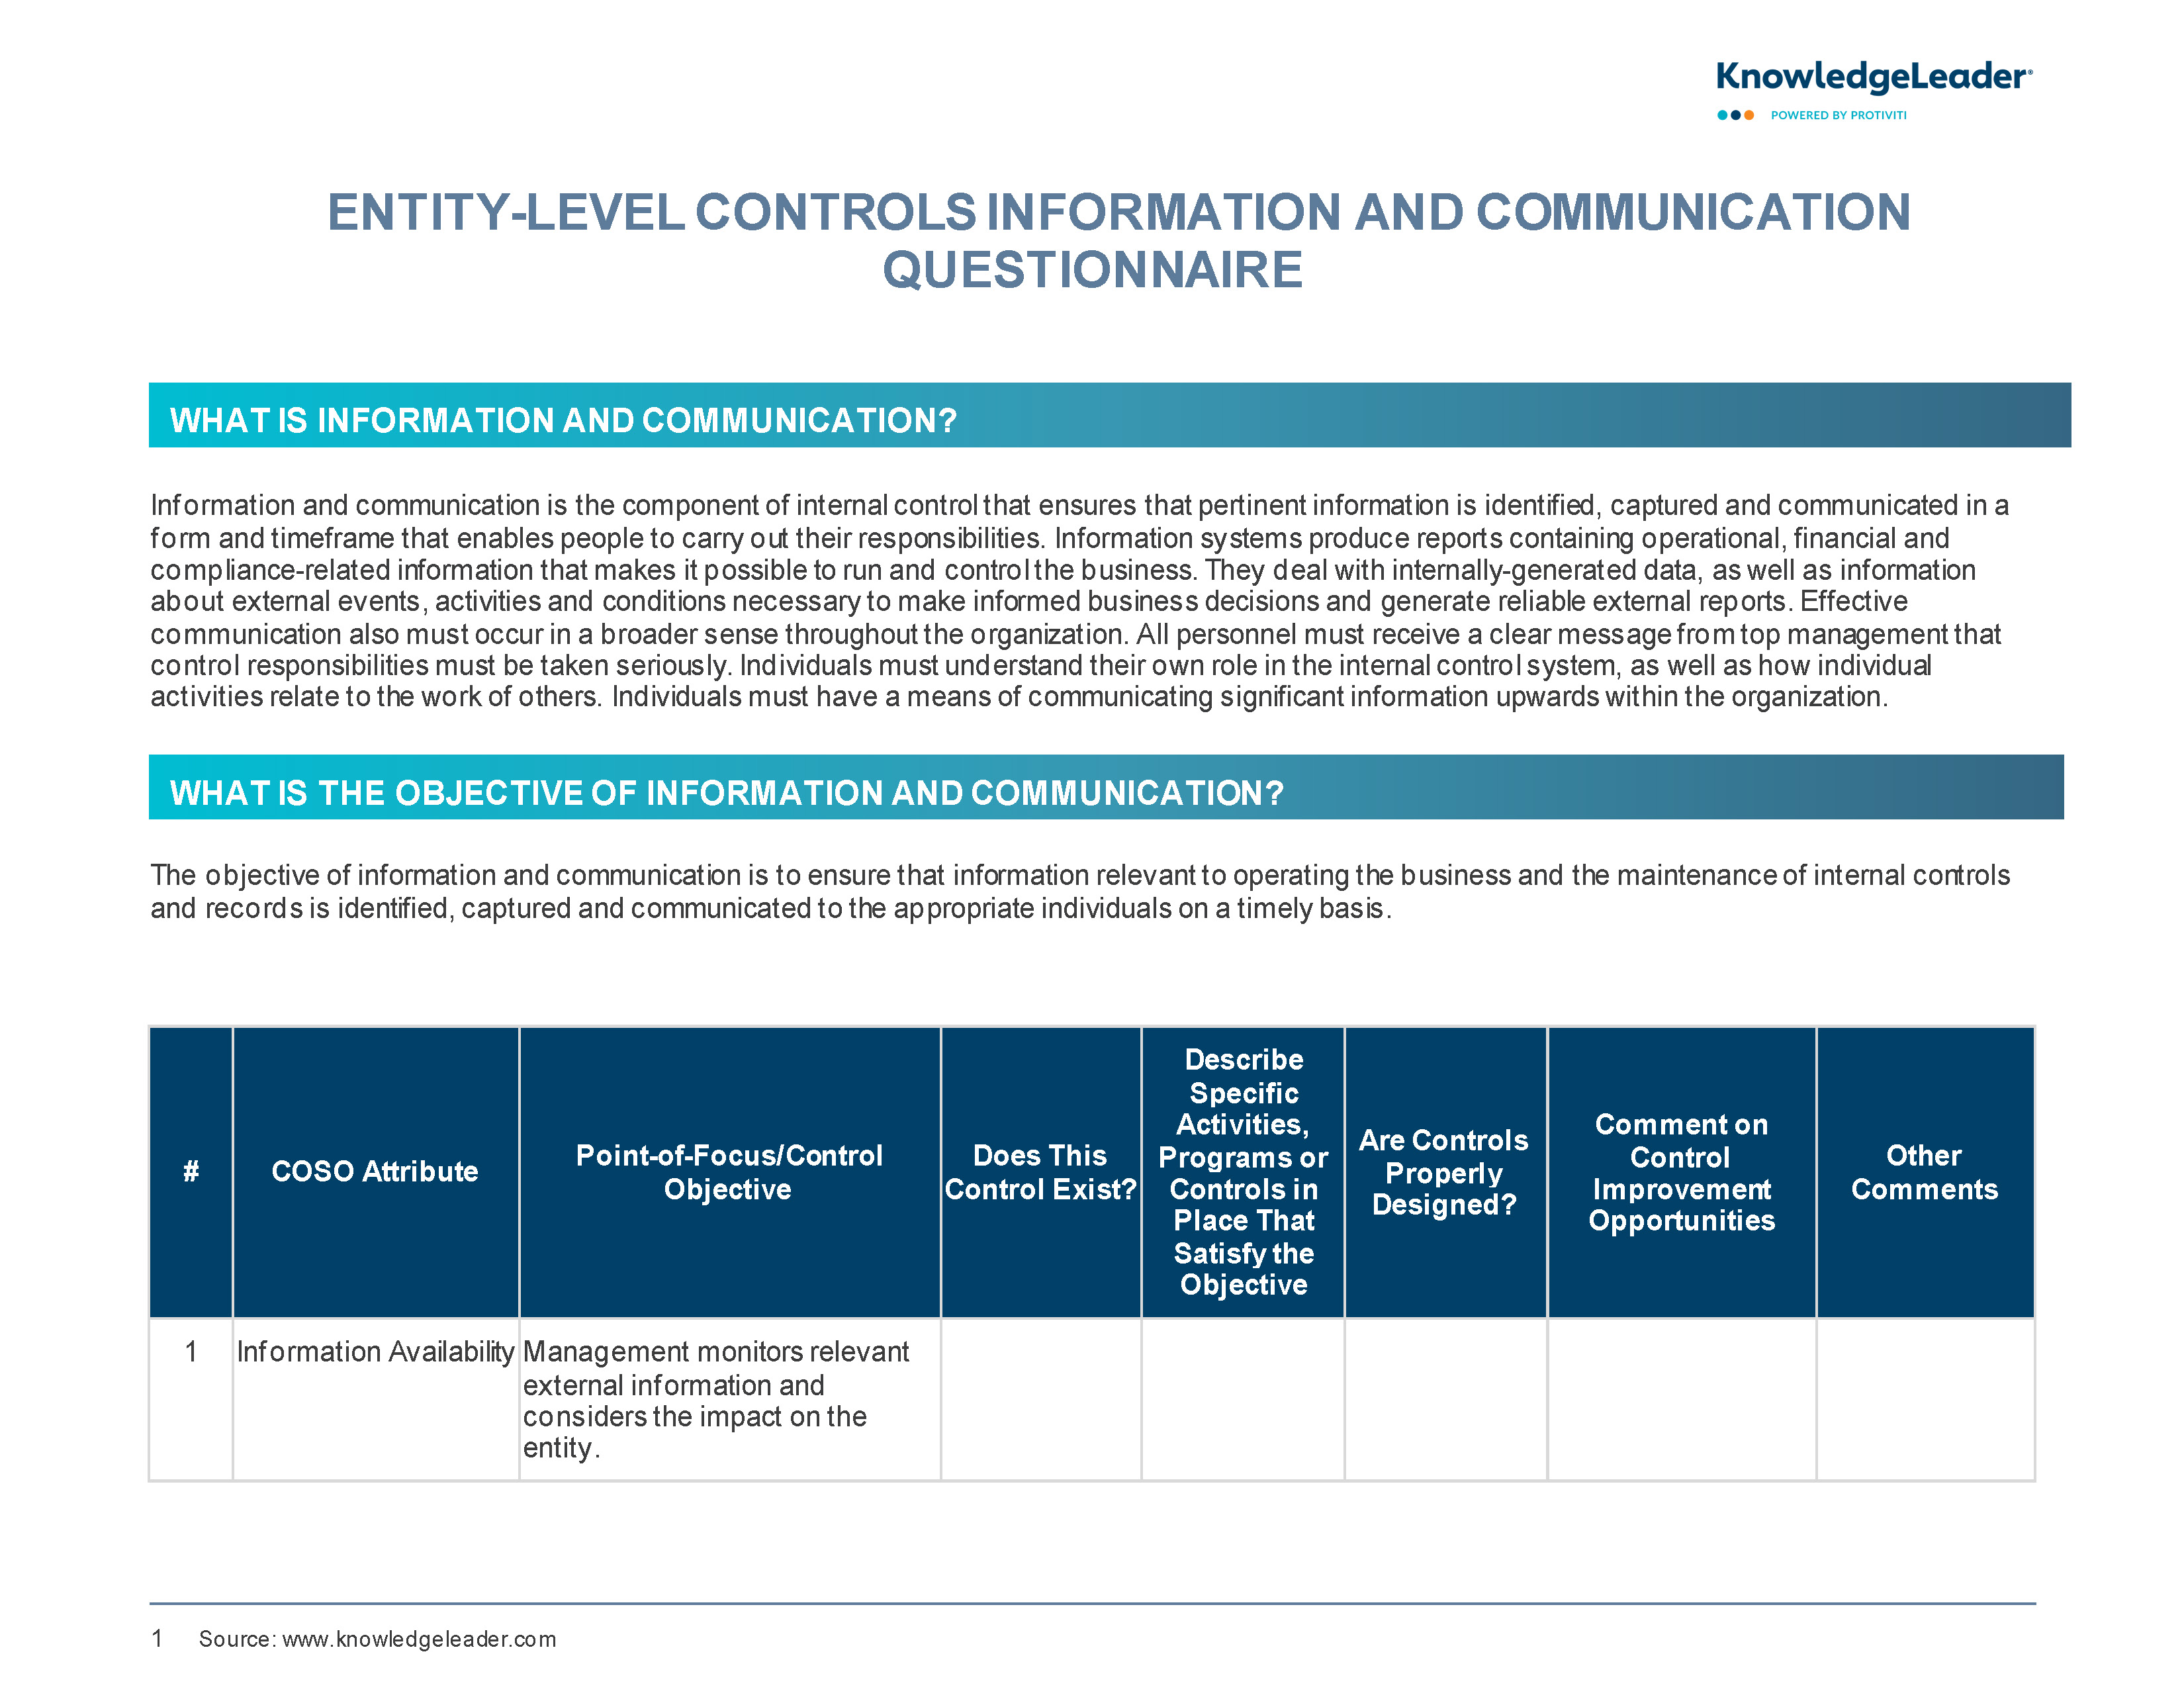 Screenshot of the first page of Entity-Level Controls Information and Communication Questionnaire